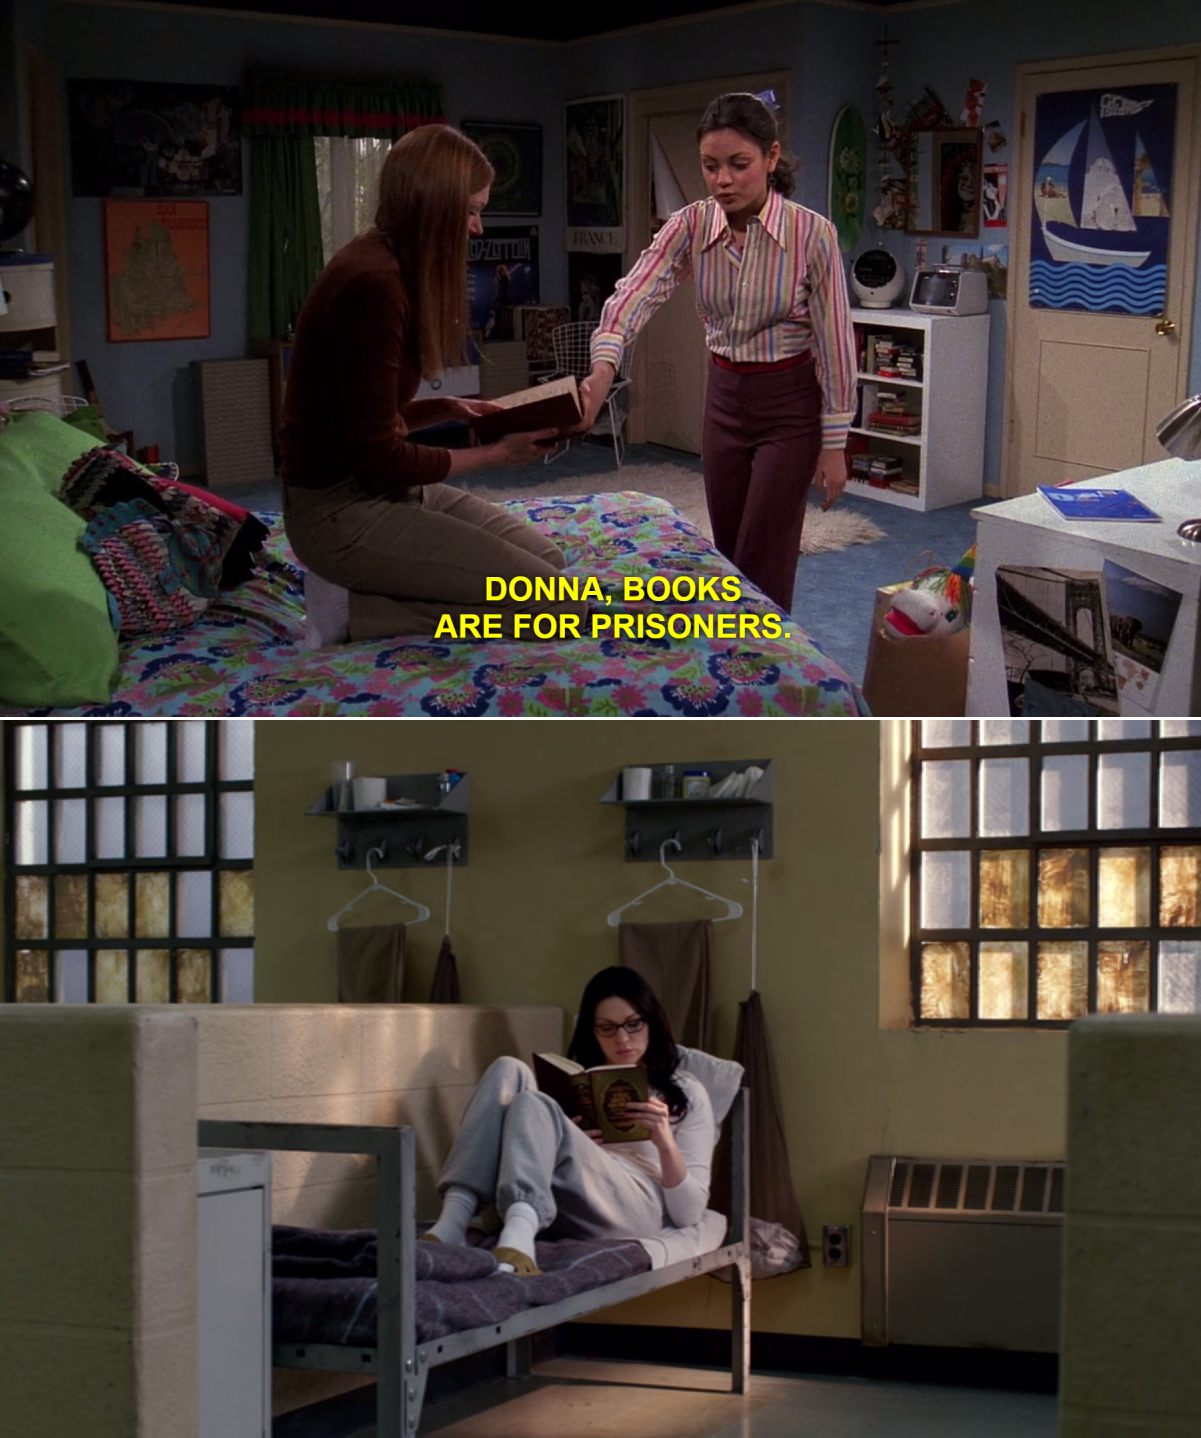 70s show orange is the new black meme - Donna, Books Are For Prisoners Ind